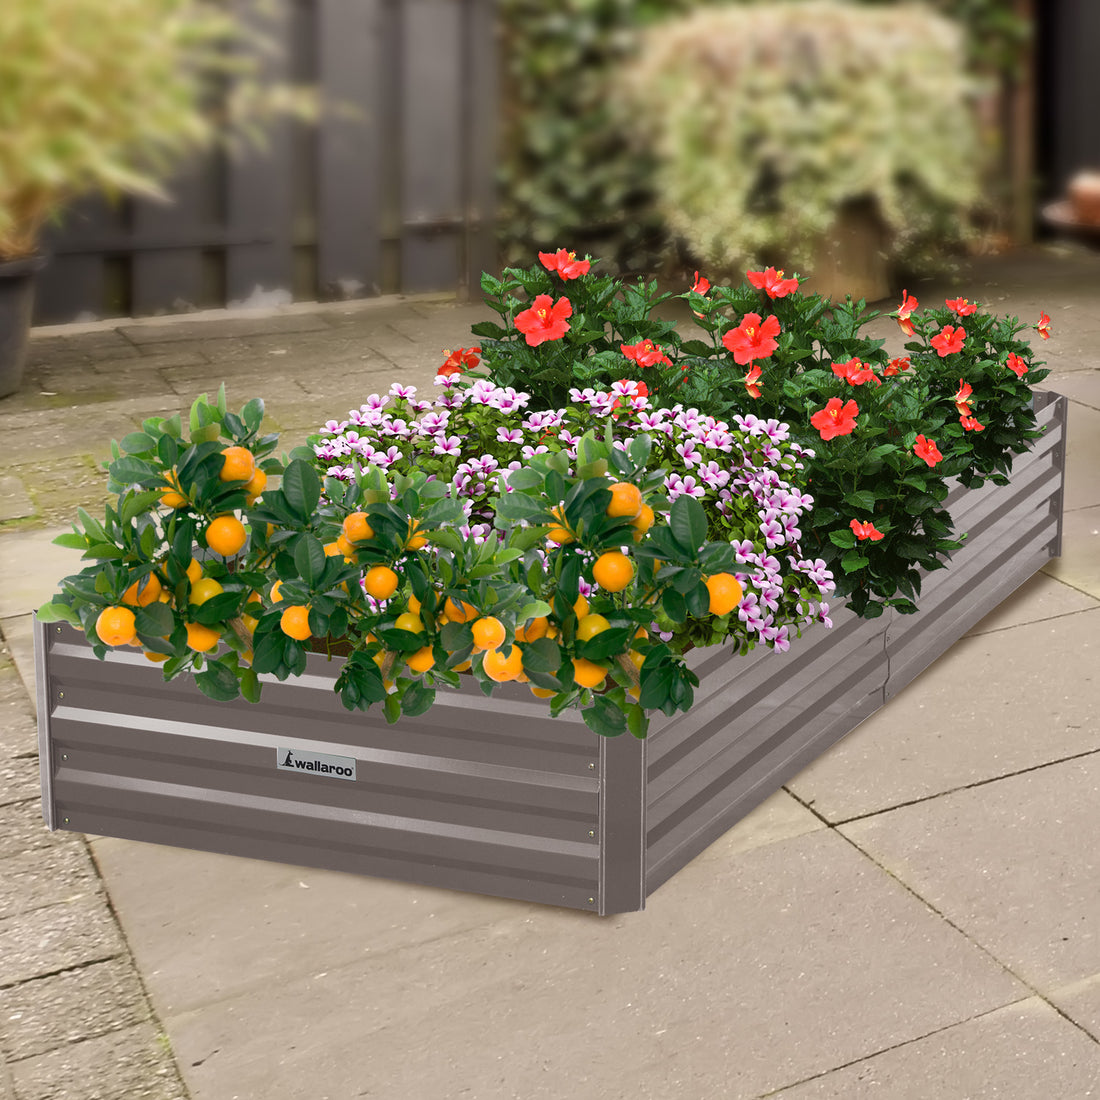 planted with flowers galvanised steel raised garden bed 